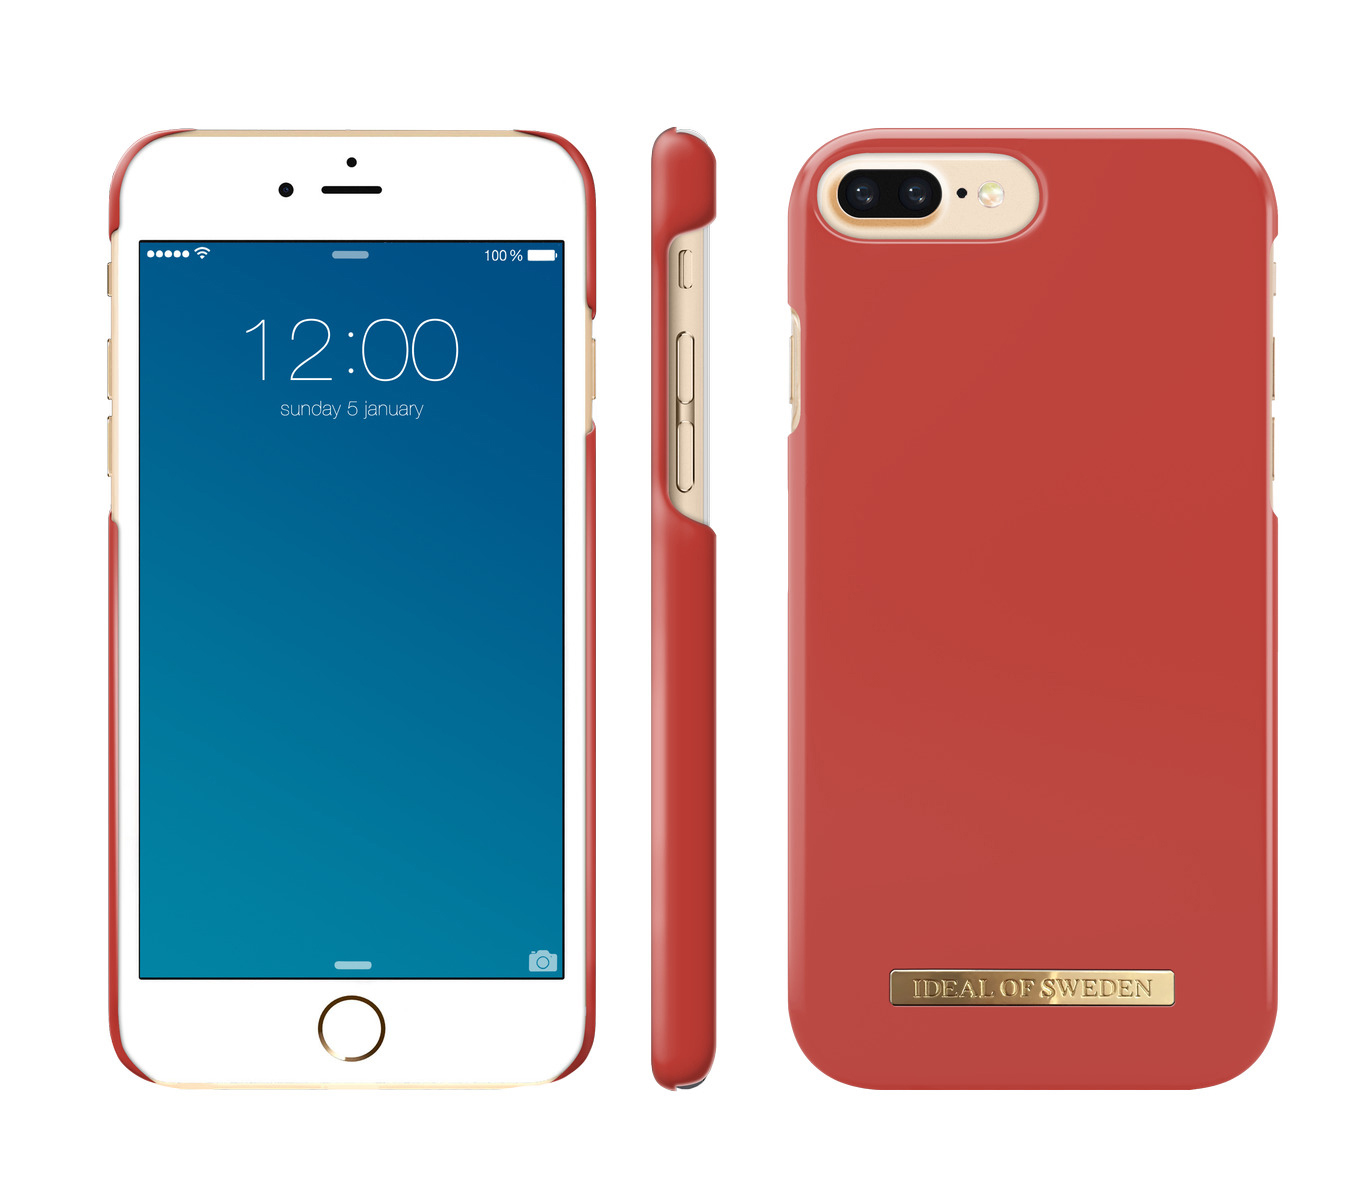 Fashion, 6 7 iPhone Backcover, Plus iPhone Aurora 8 Plus, SWEDEN Apple, OF Red Plus, ,iPhone IDEAL